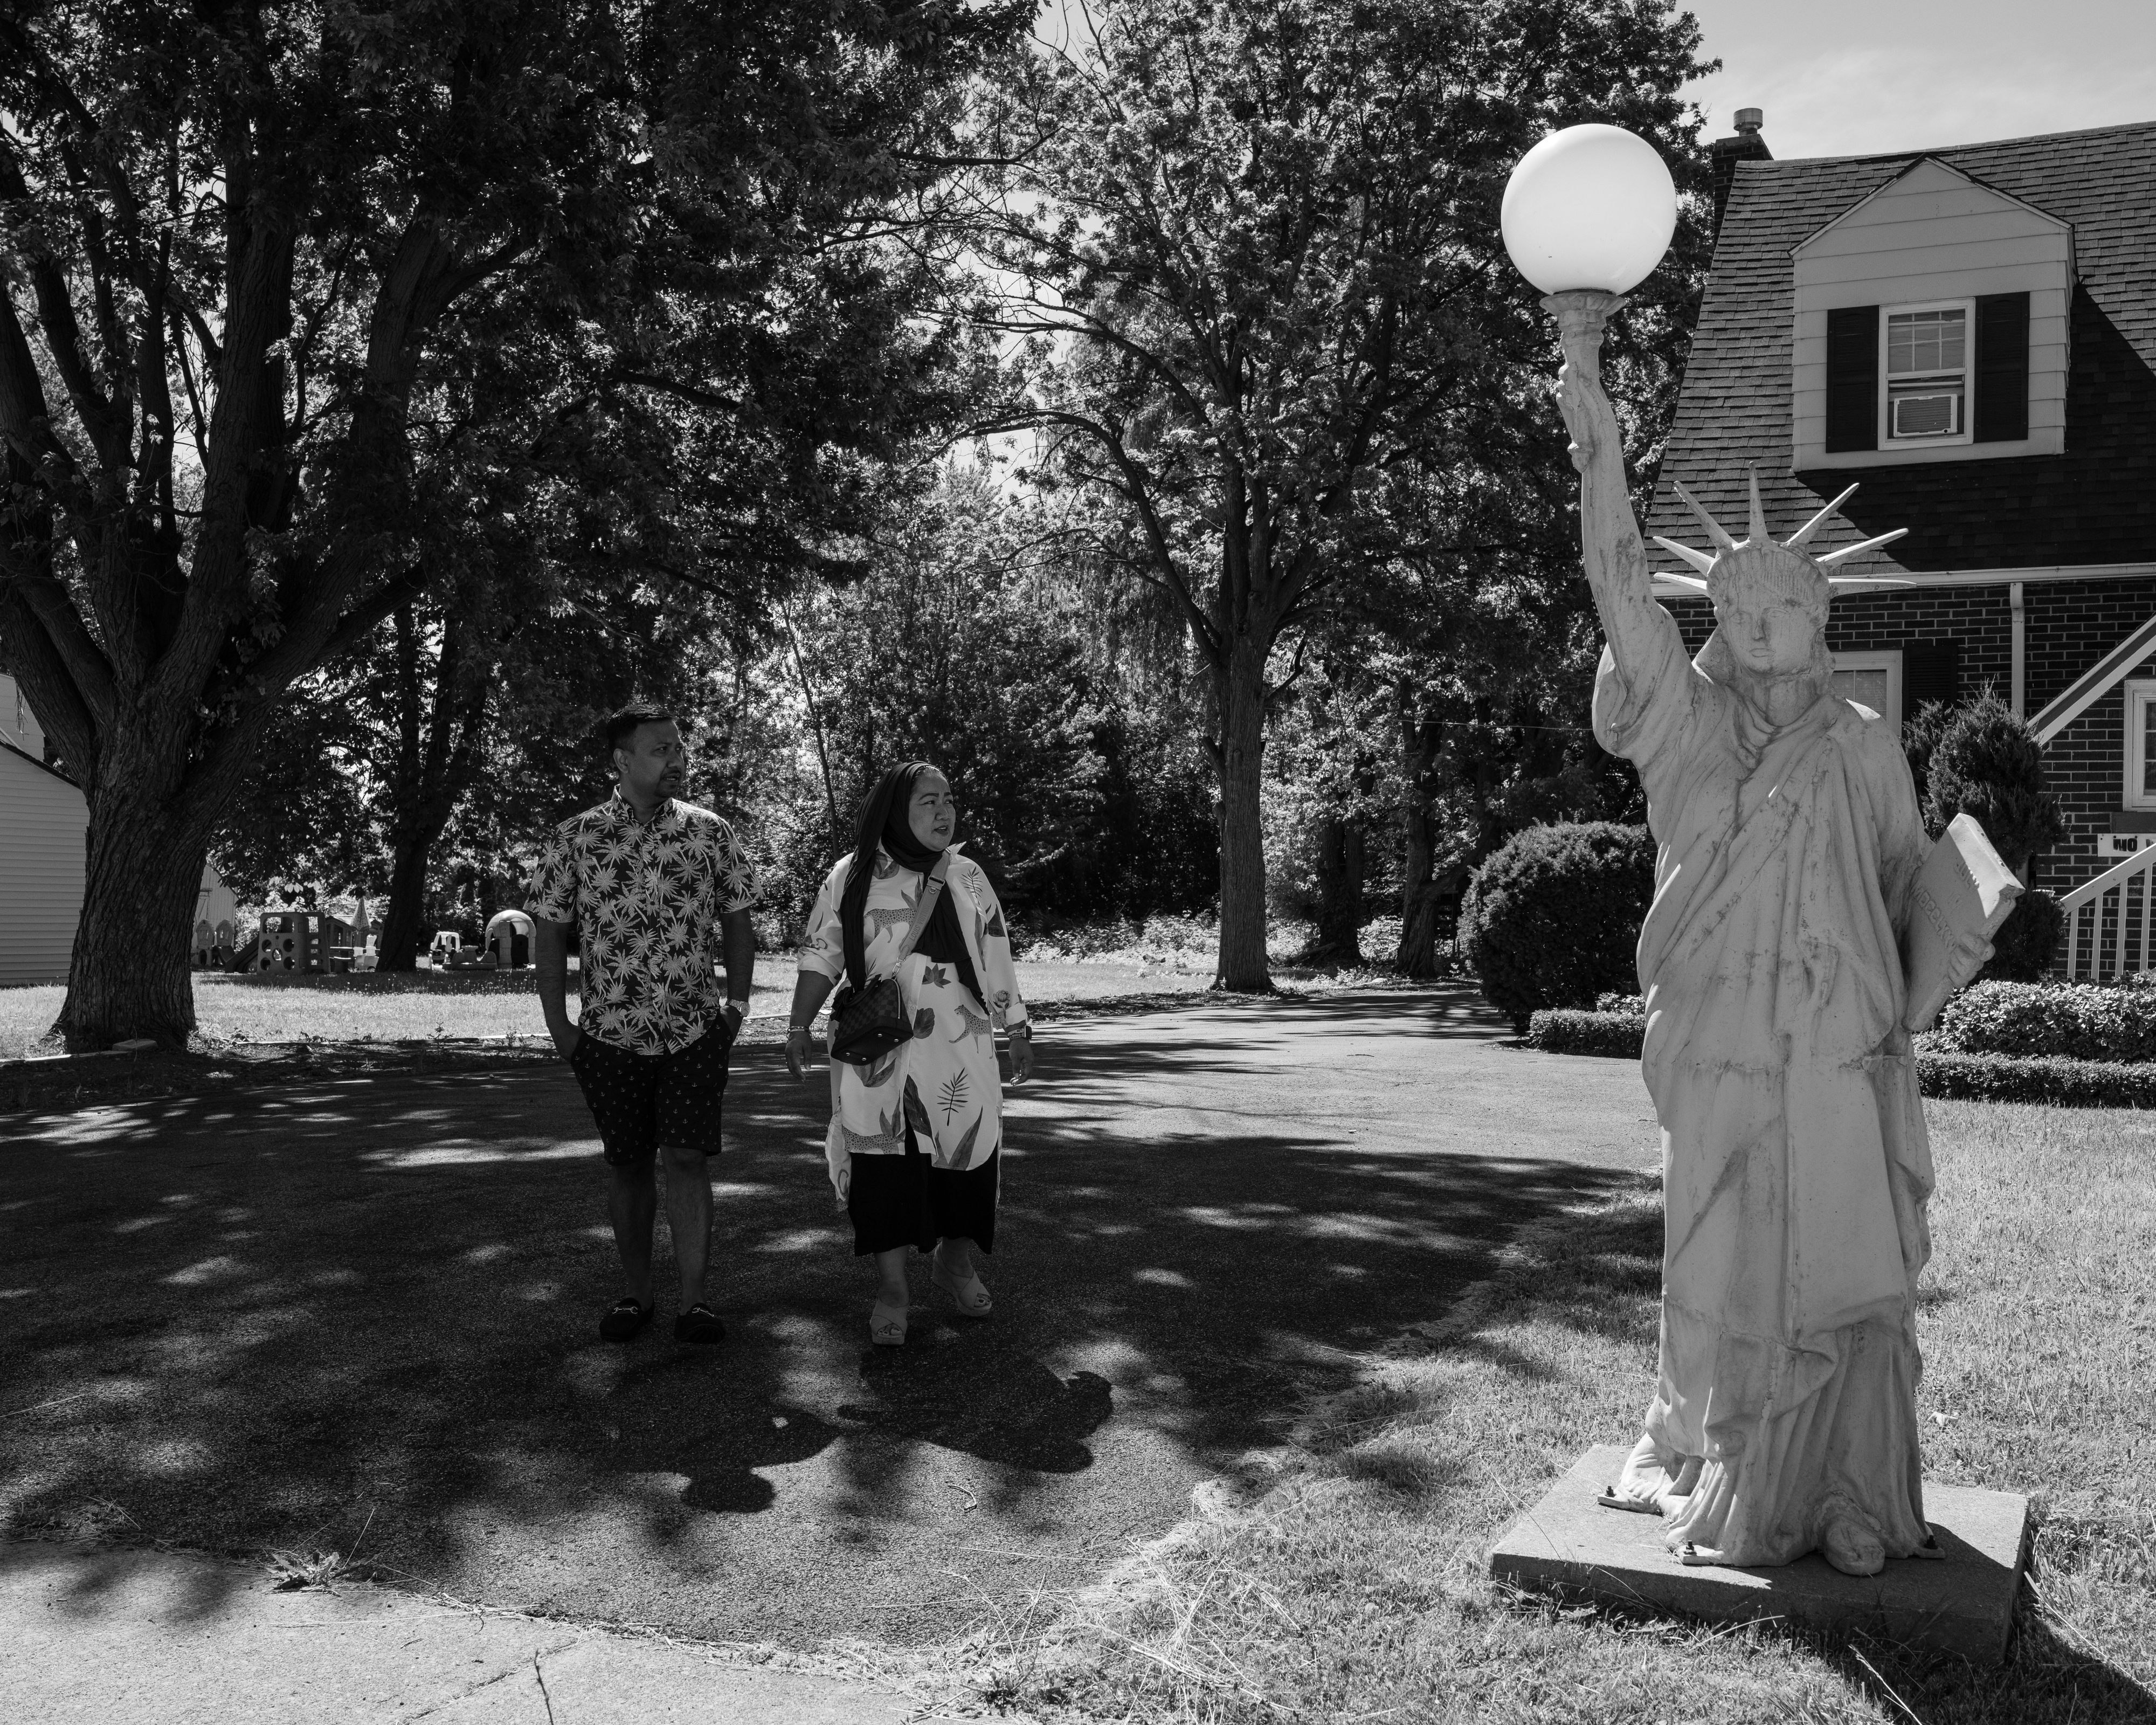 A man and a woman stand on a lawn next to a small replica of the Statue of Liberty.